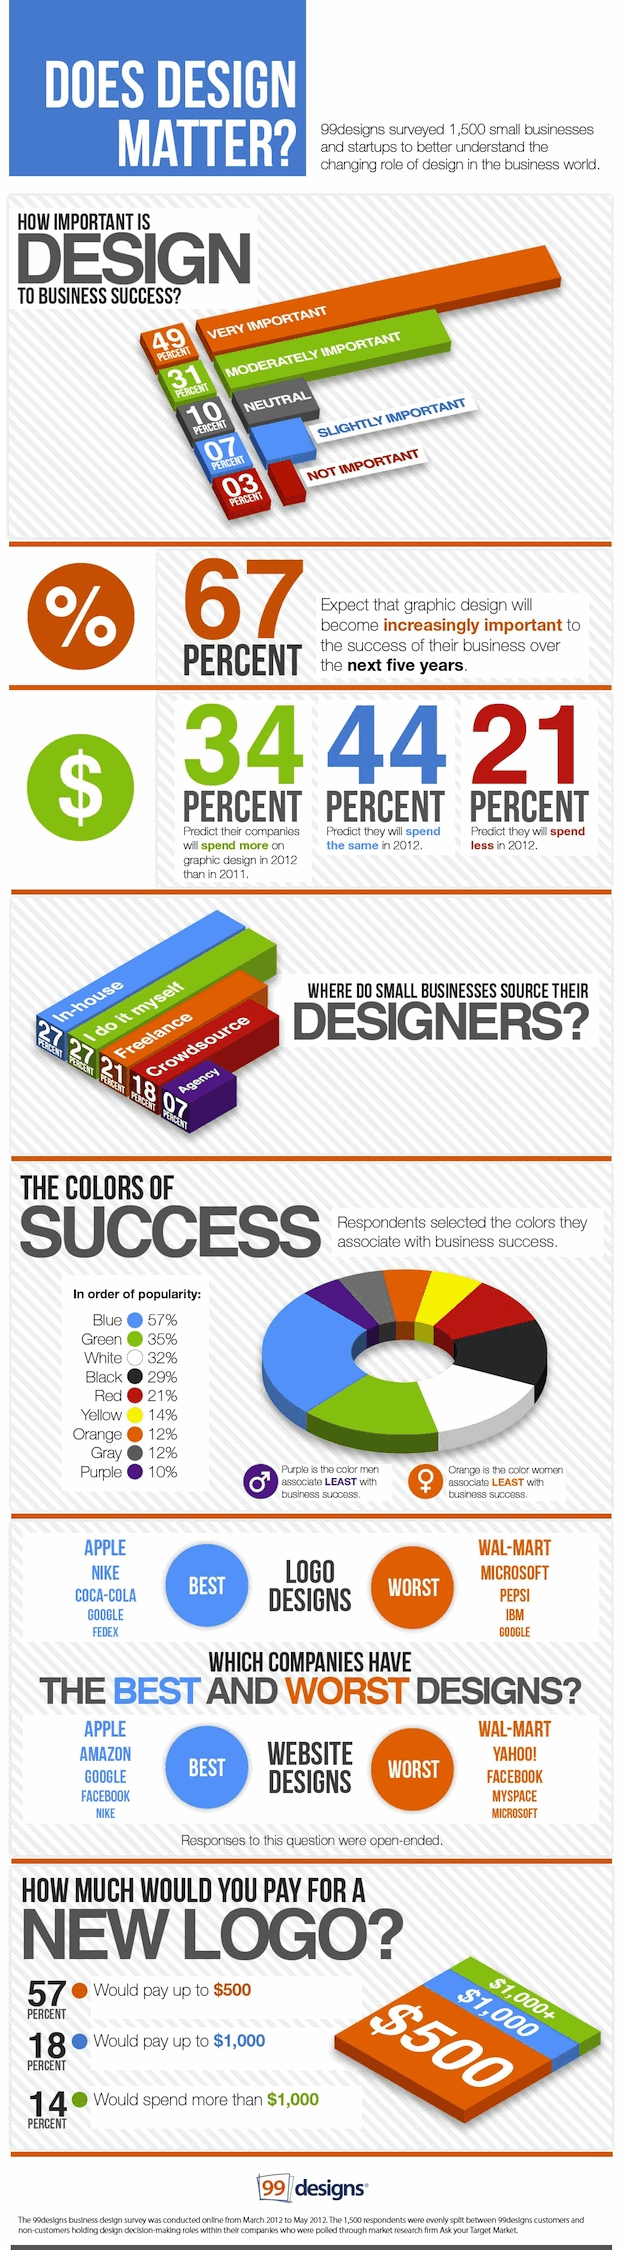 Infographic - Does Design Matter?